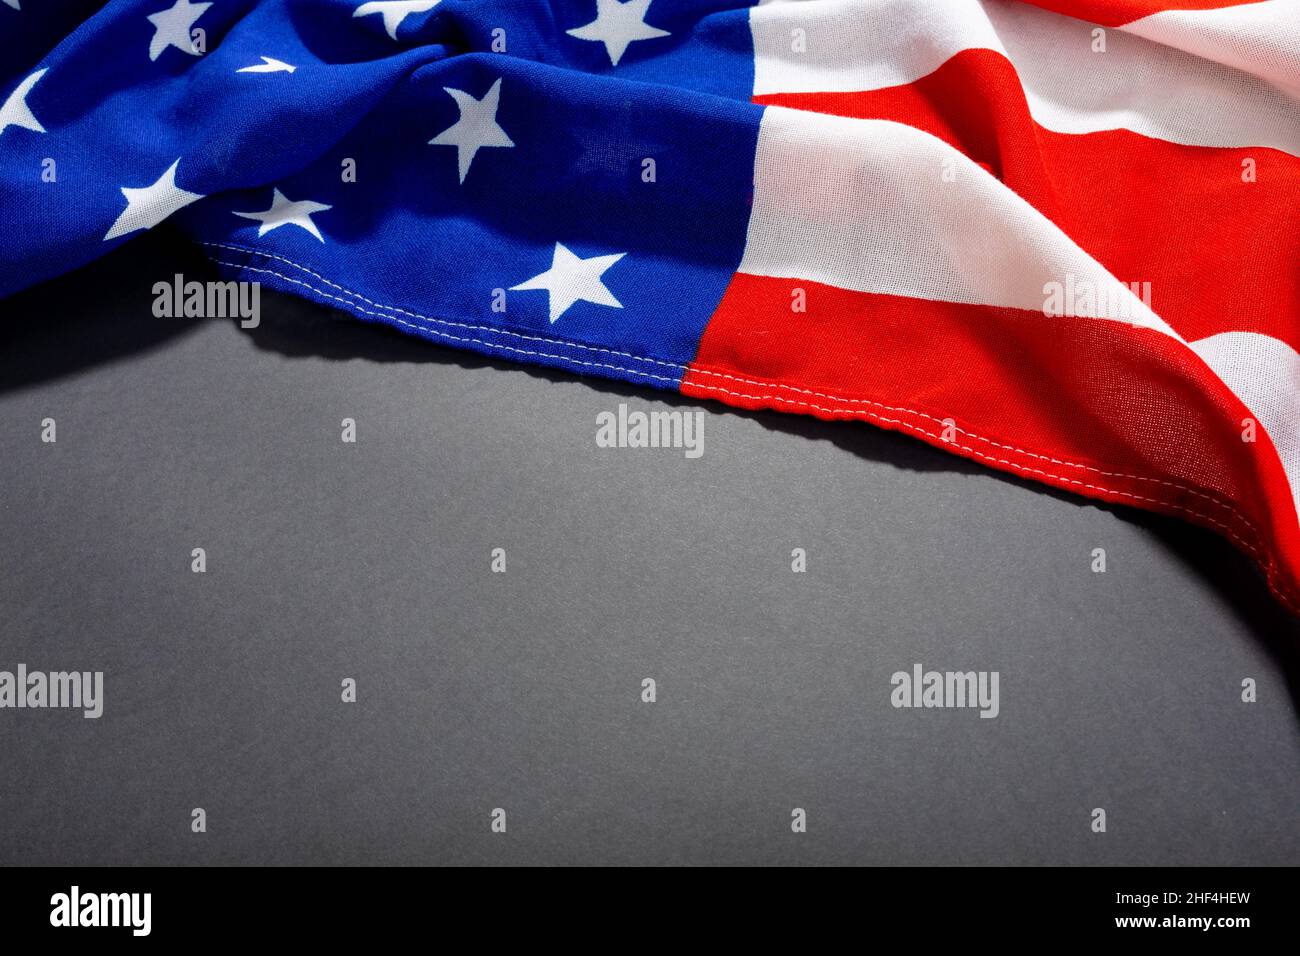 High angle shot of america flag with stars and stripes pattern on black table and copy space Stock Photo